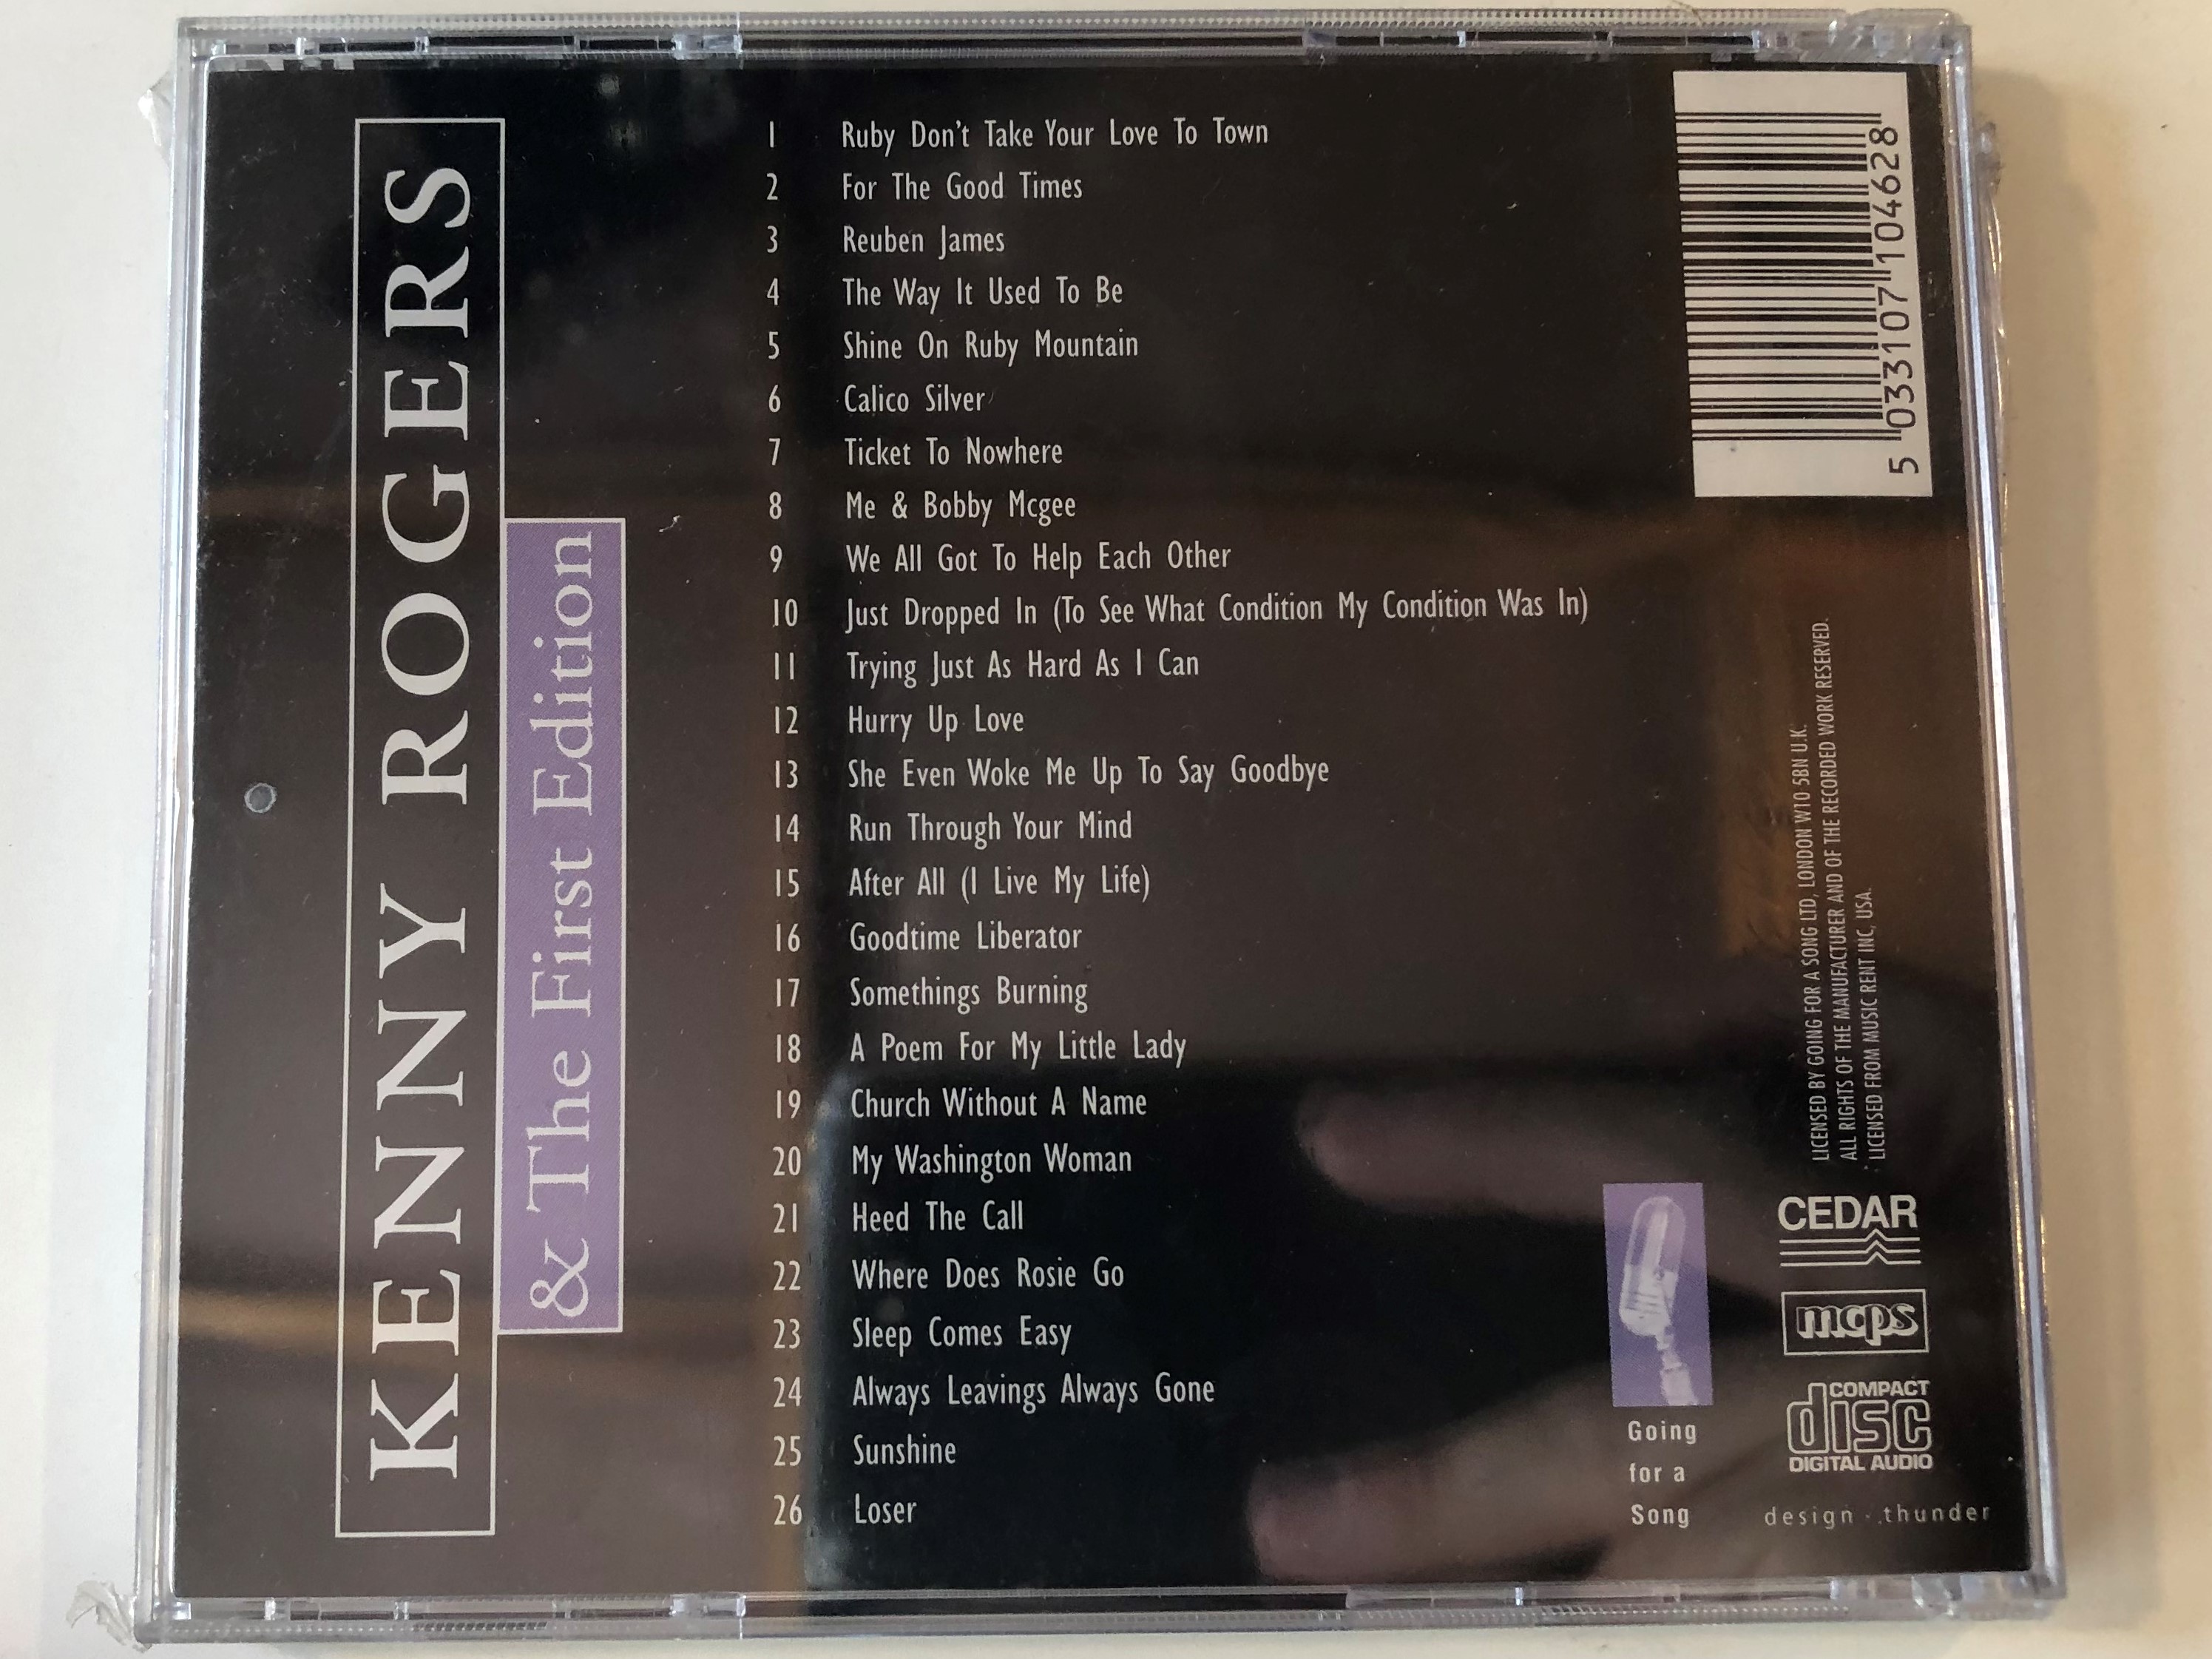 kenny-rogers-the-first-edition-going-for-a-song-audio-cd-5033107104628-2-.jpg